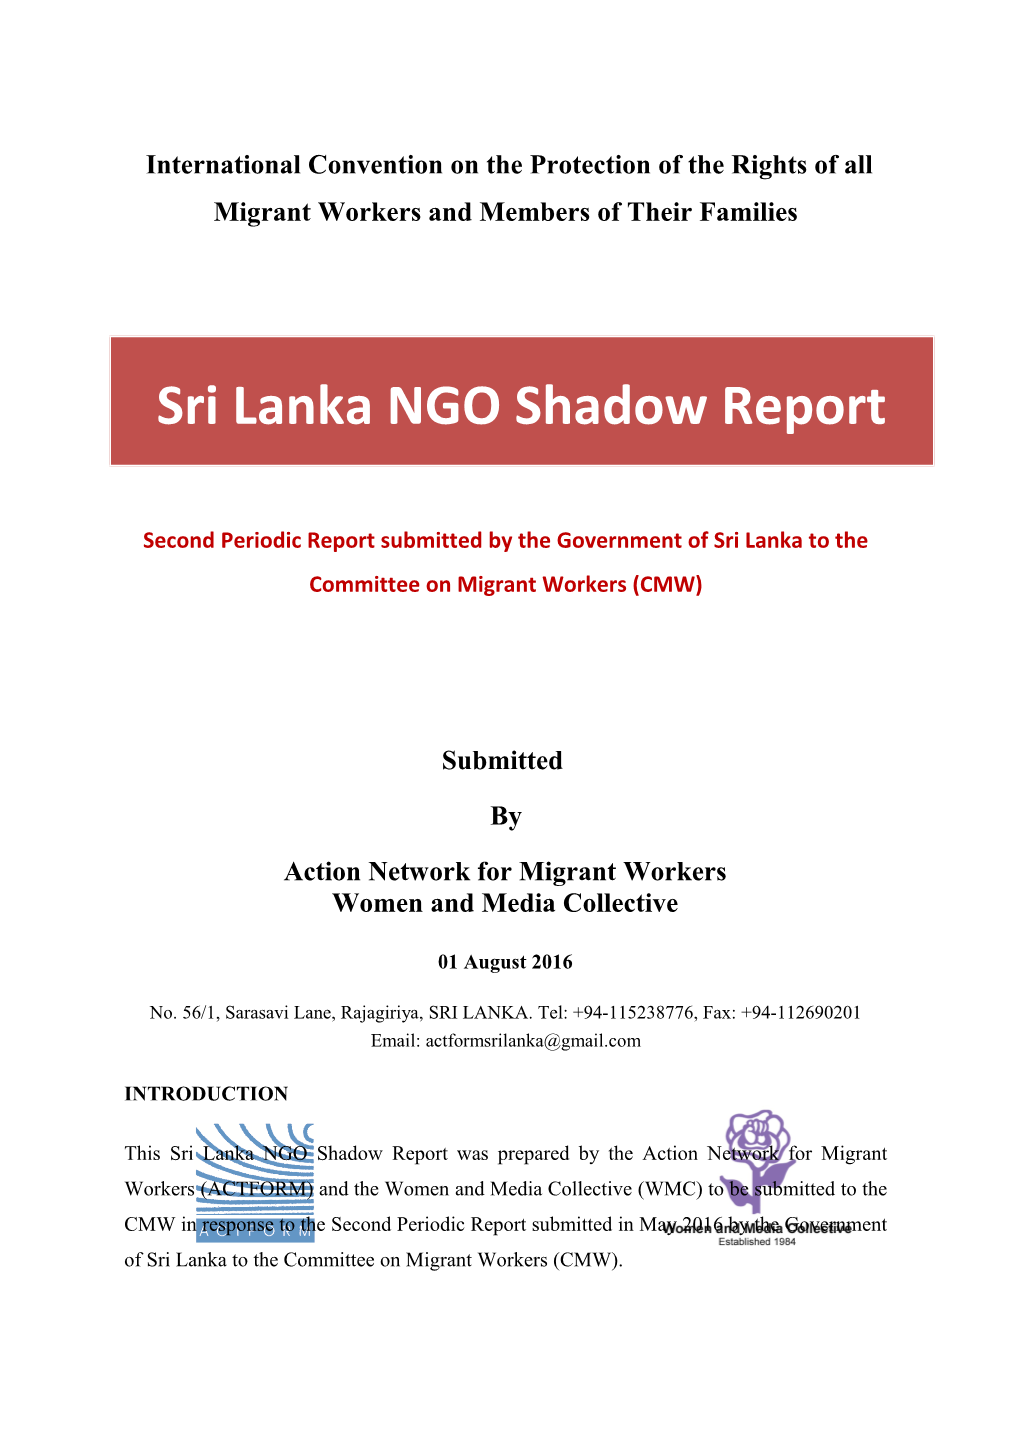 Second Periodic Report Submitted by the Government of Sri Lanka to the Committee on Migrant